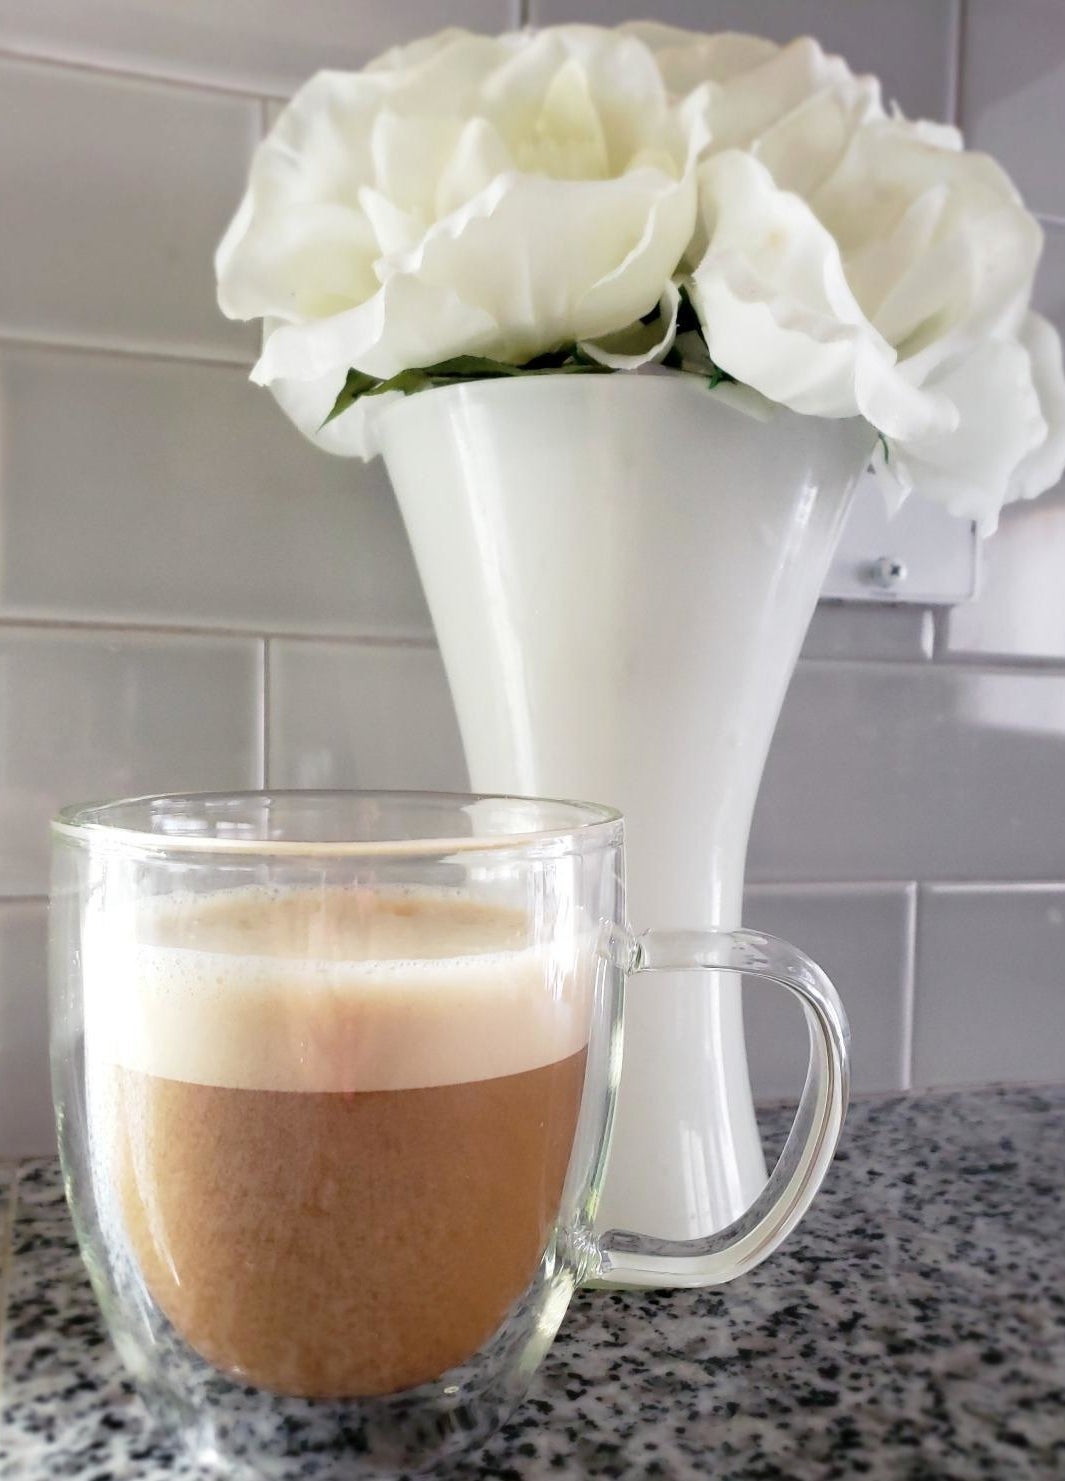 Reviewer image of clear coffee mug with beverage inside in front of white vase